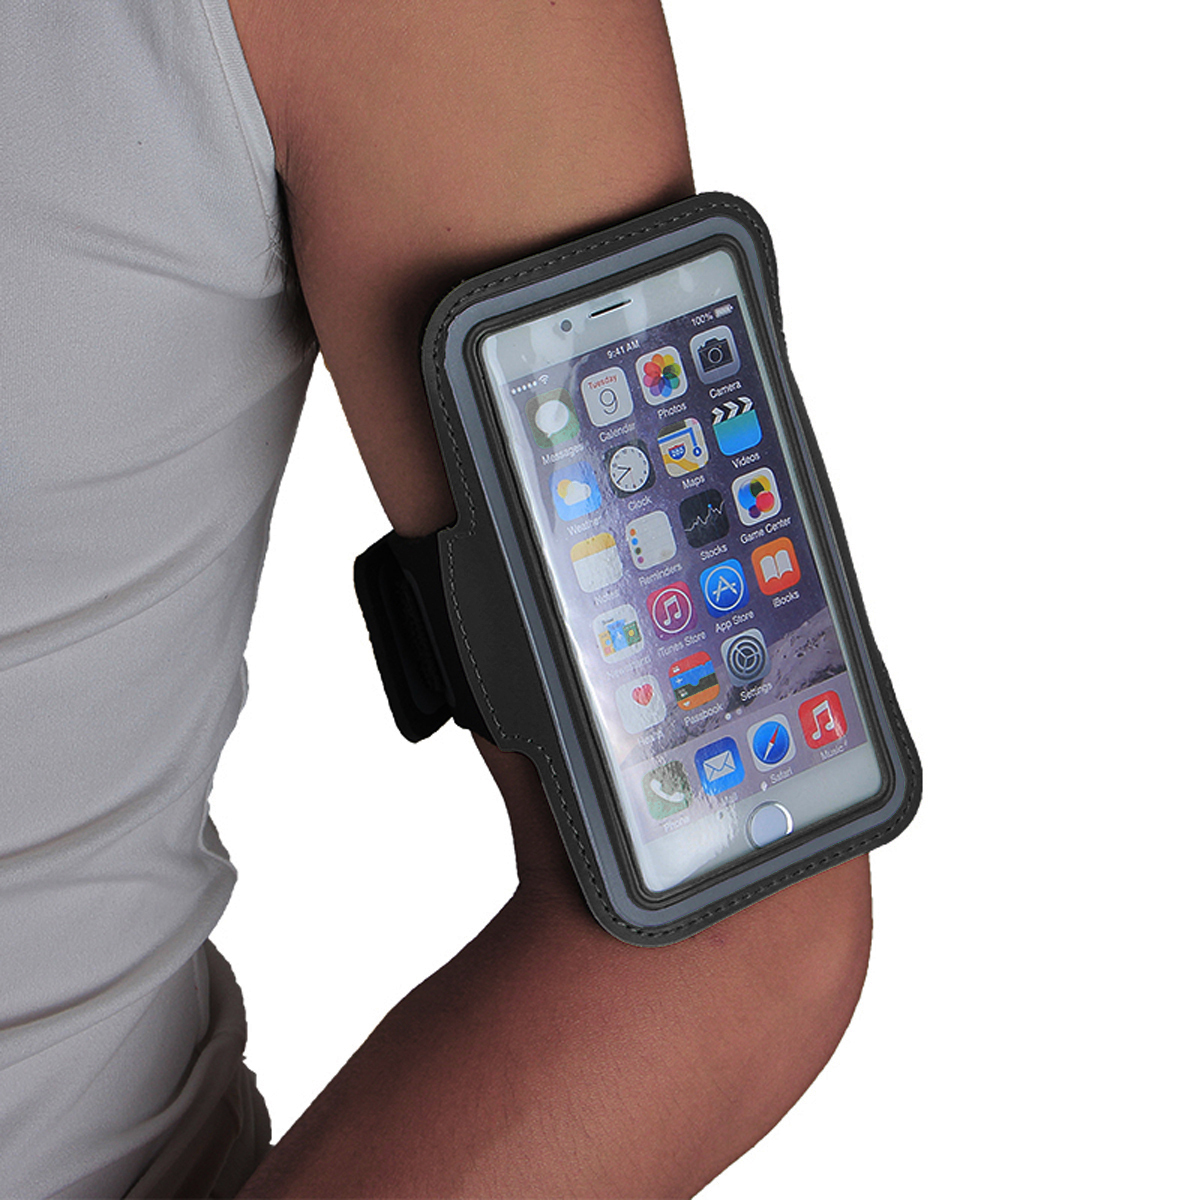 Universal-Sports-Elastic-Armband-Sweatproof-Touch-Screen-Mobile-Phone-Arm-Bags-with-Earphone-Port-fo-1890485-11